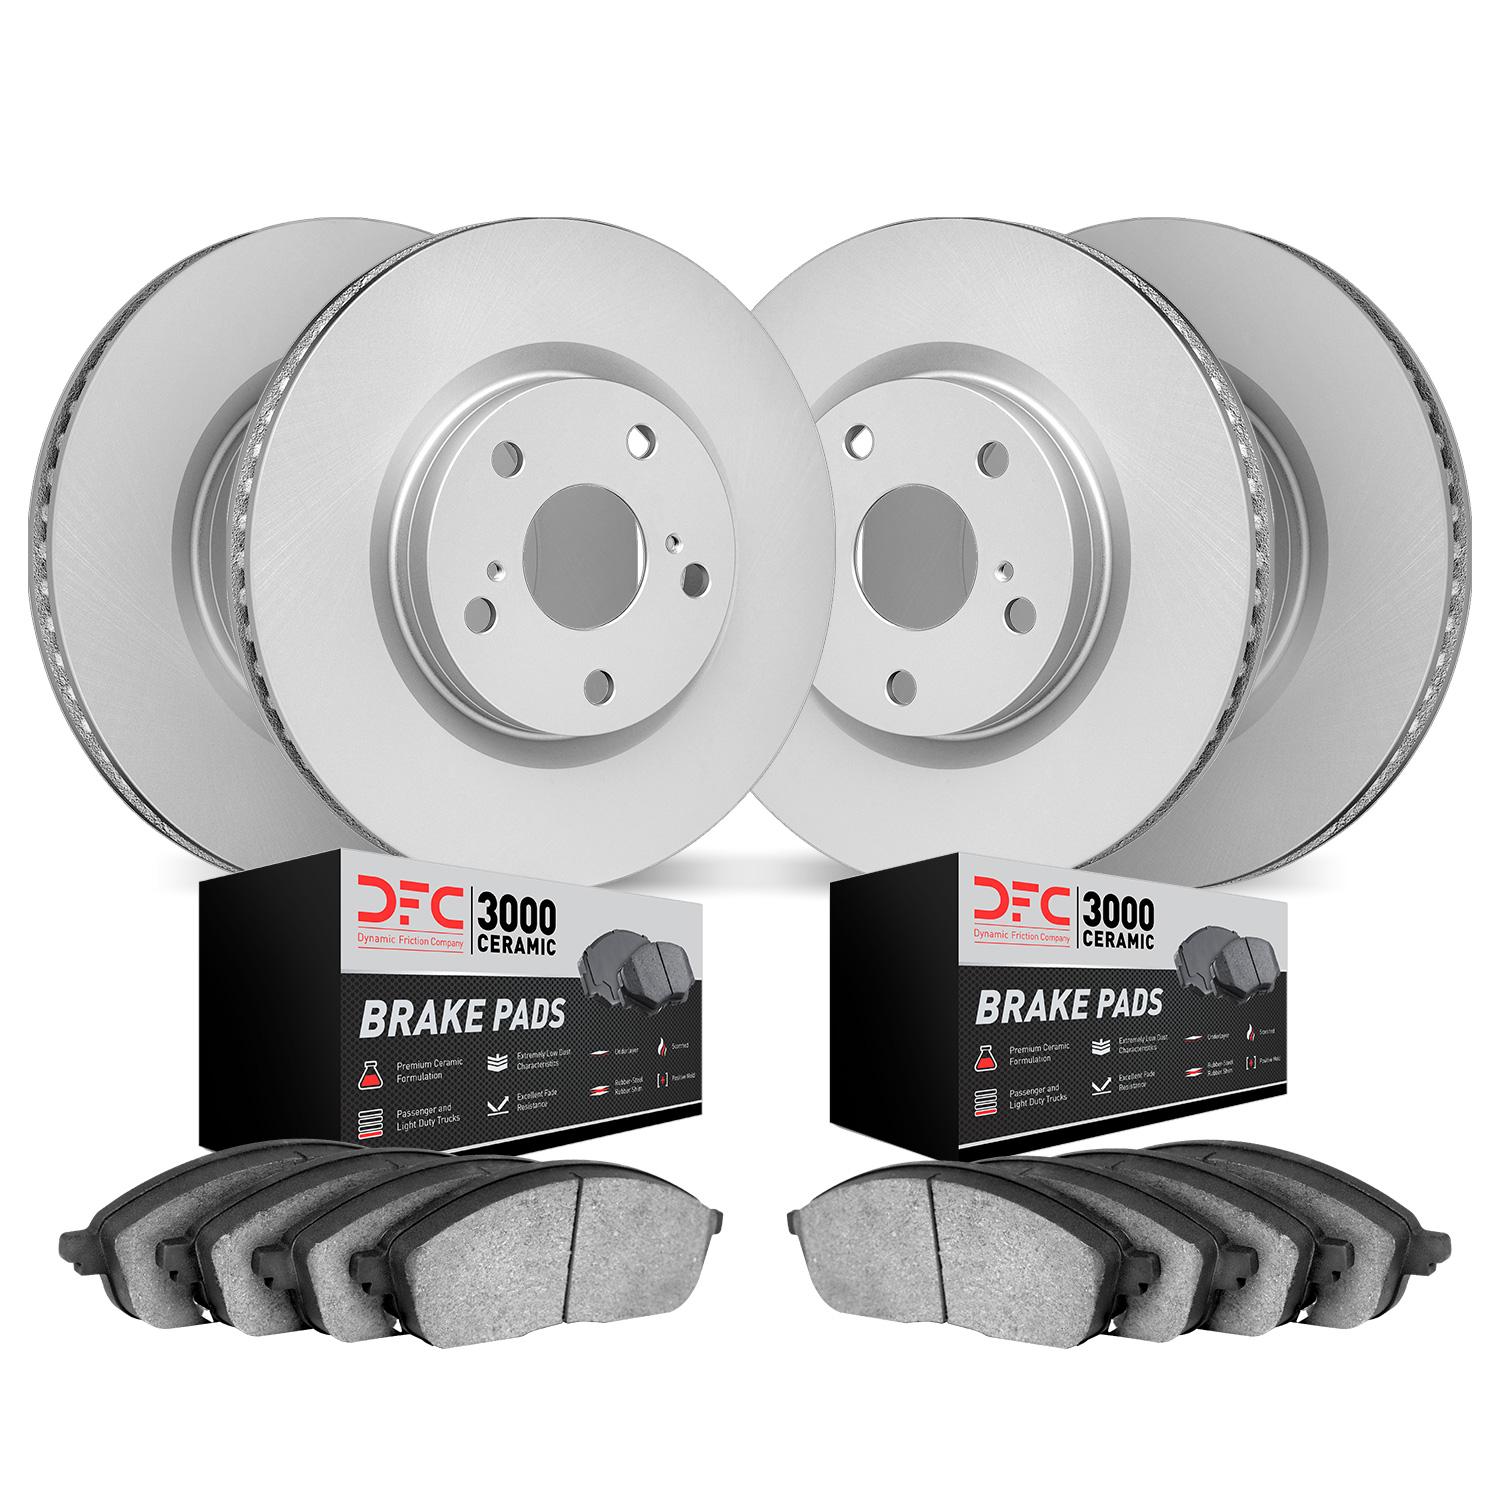 4304-31035 Geospec Brake Rotors with 3000-Series Ceramic Brake Pads Kit, 2001-2006 BMW, Position: Front and Rear